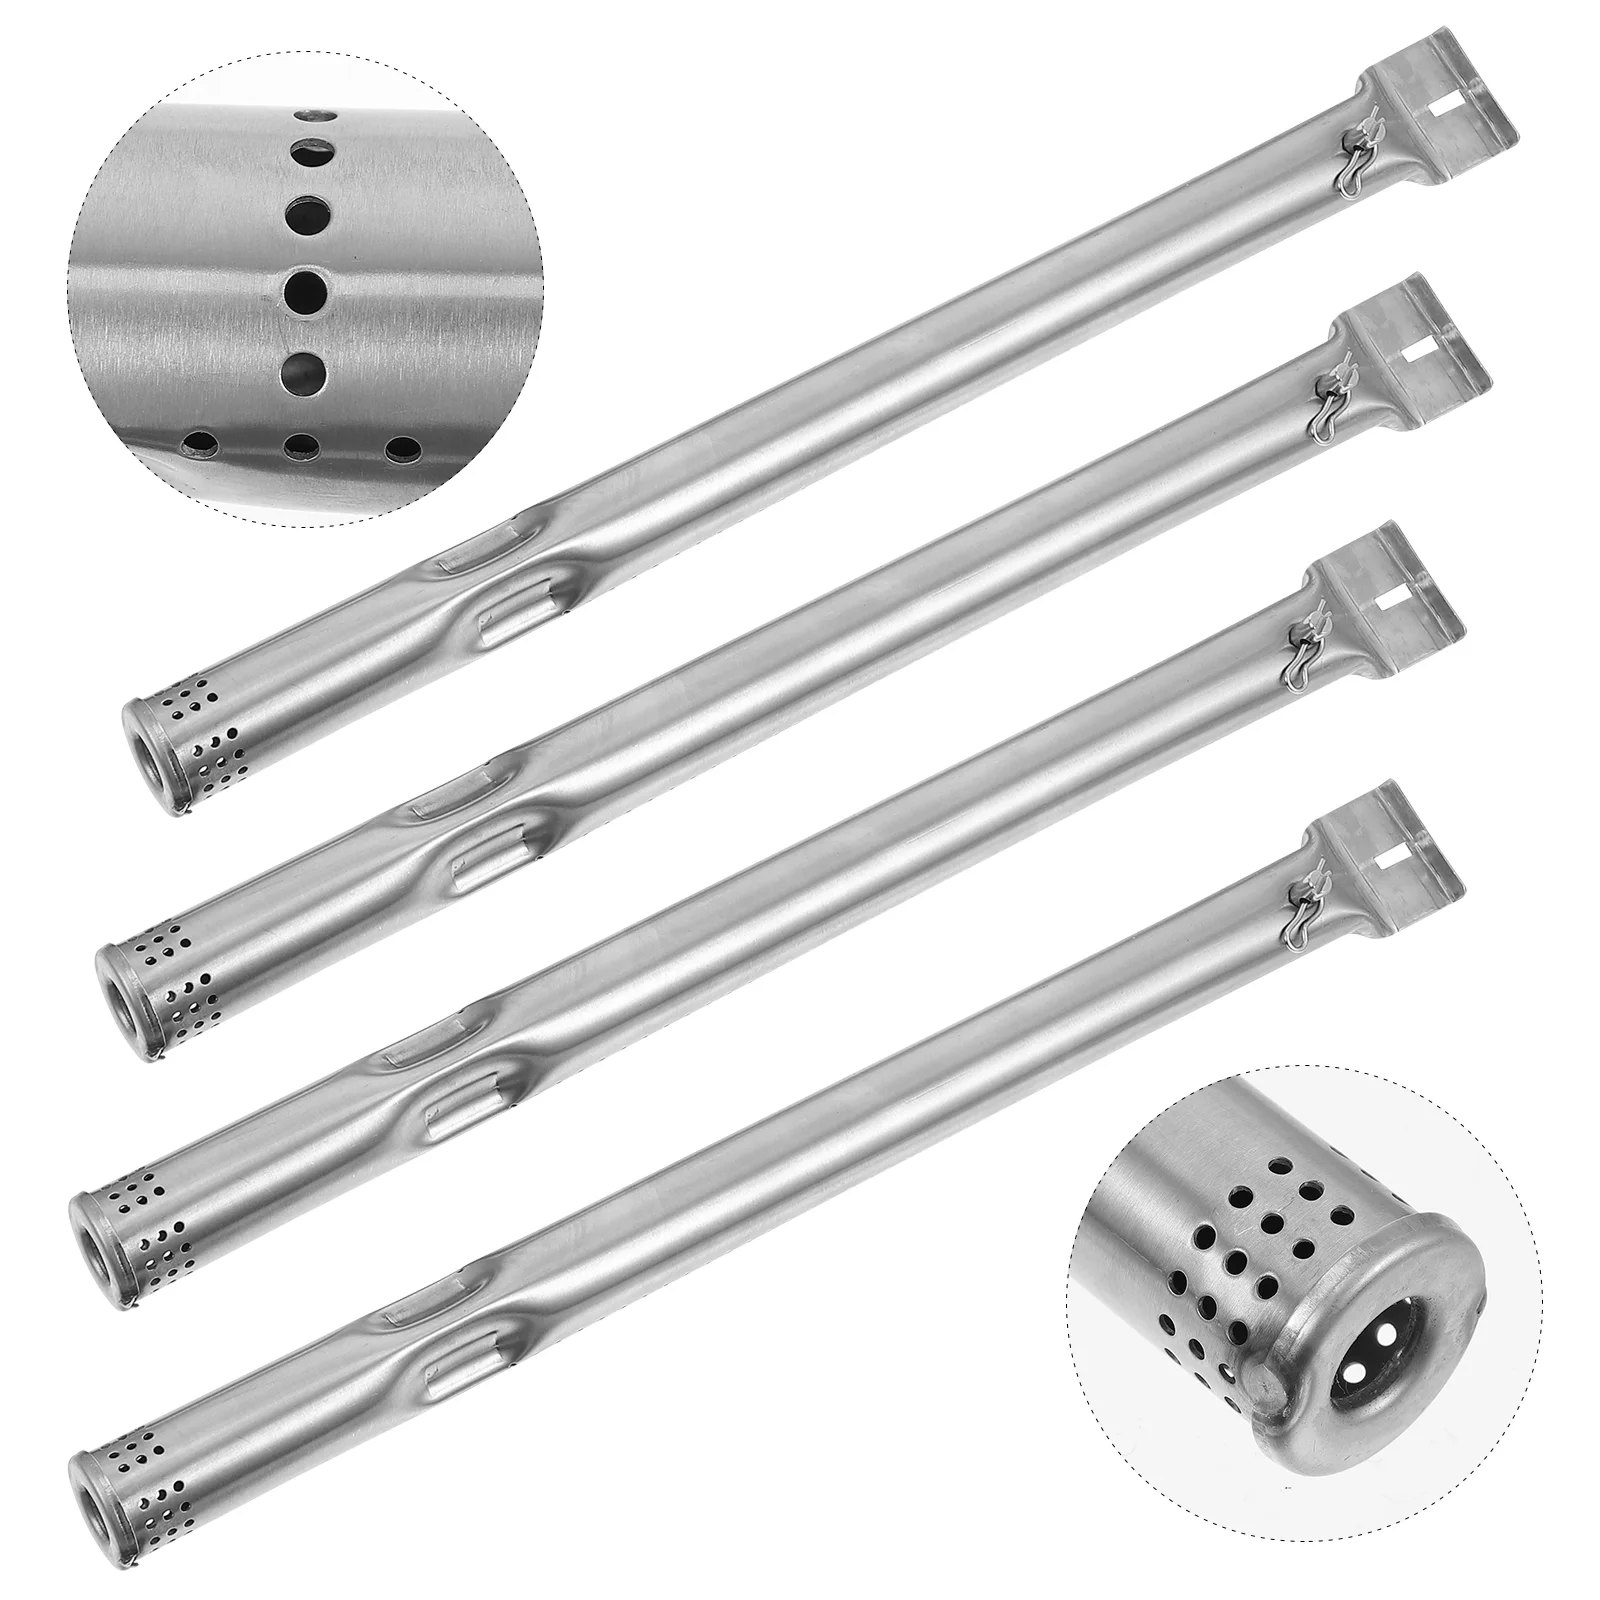 

4 Pcs Oven Hot Plate Home Burner Tubes Grill Gas Accessories Griddles Grills BBQ Replacement Parts Component Supplies